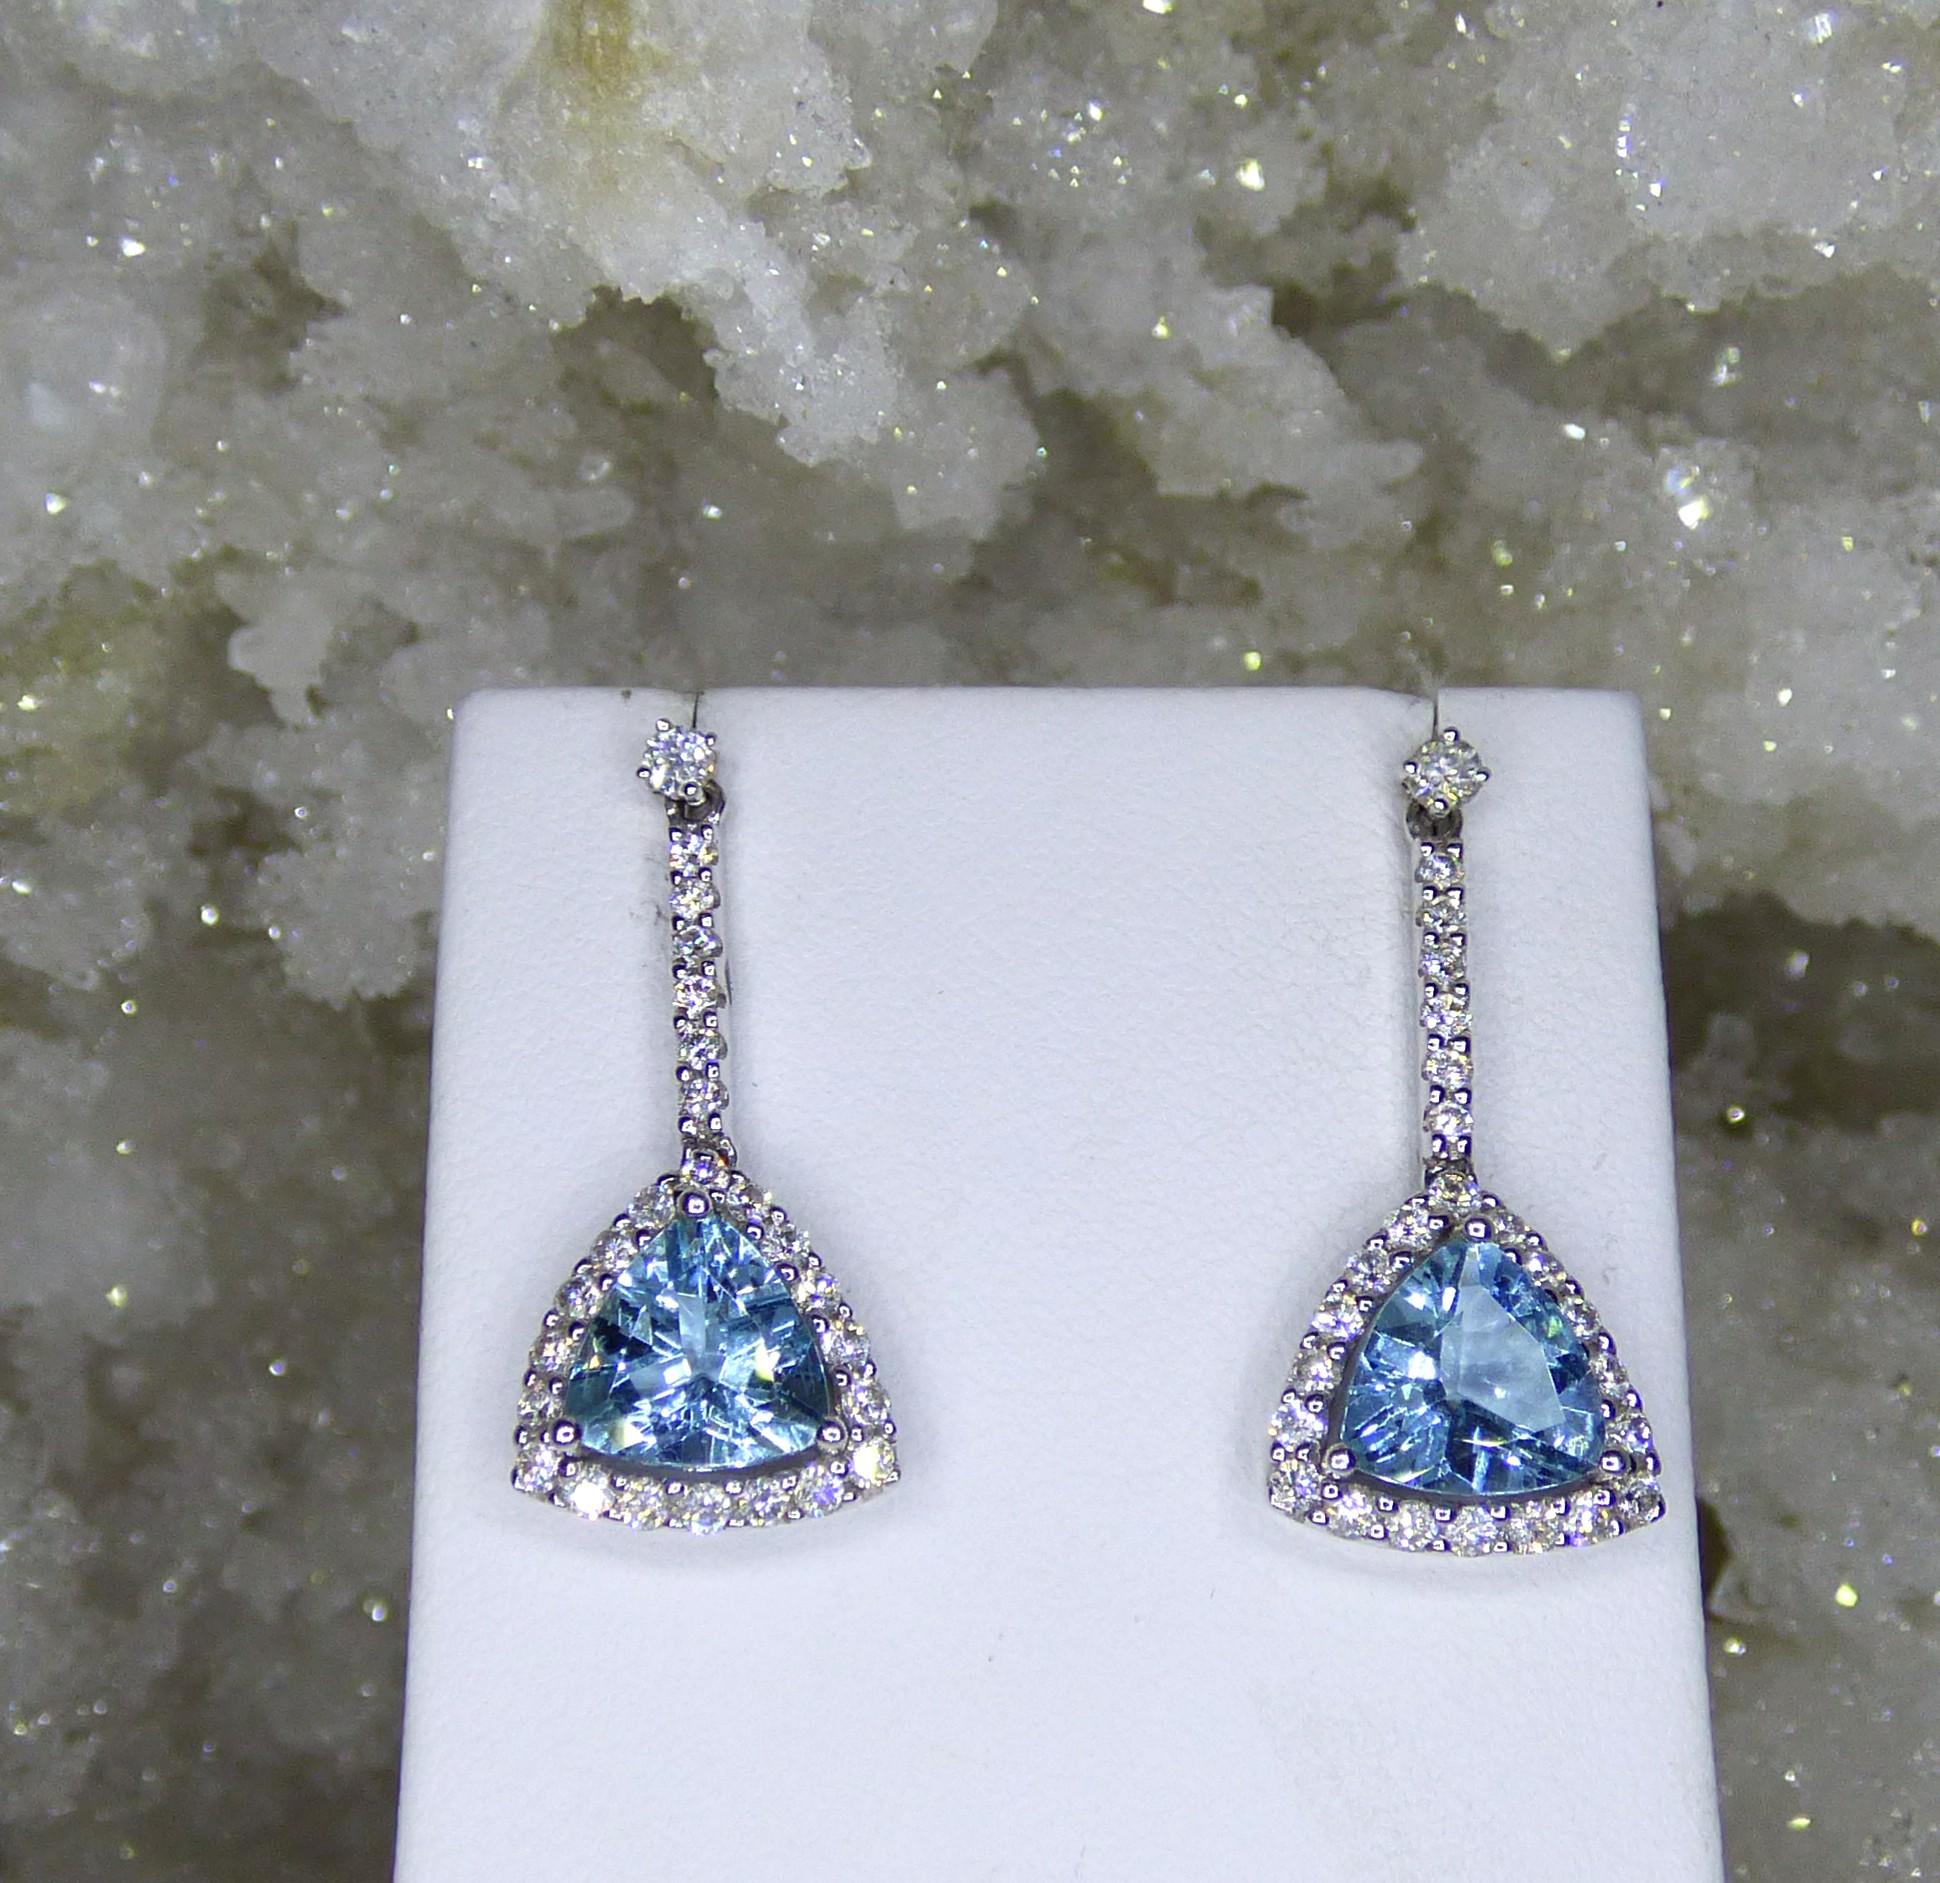 Bright clean colourful Triangular shaped Aquamarines 8X8mm (2.81 total carat weight) drop from .06ct Diamond studs. There is a further 48 Diamonds dropping down and surrounding the Aquamarines with a total Diamond weight of .86 ct.  The earrings are